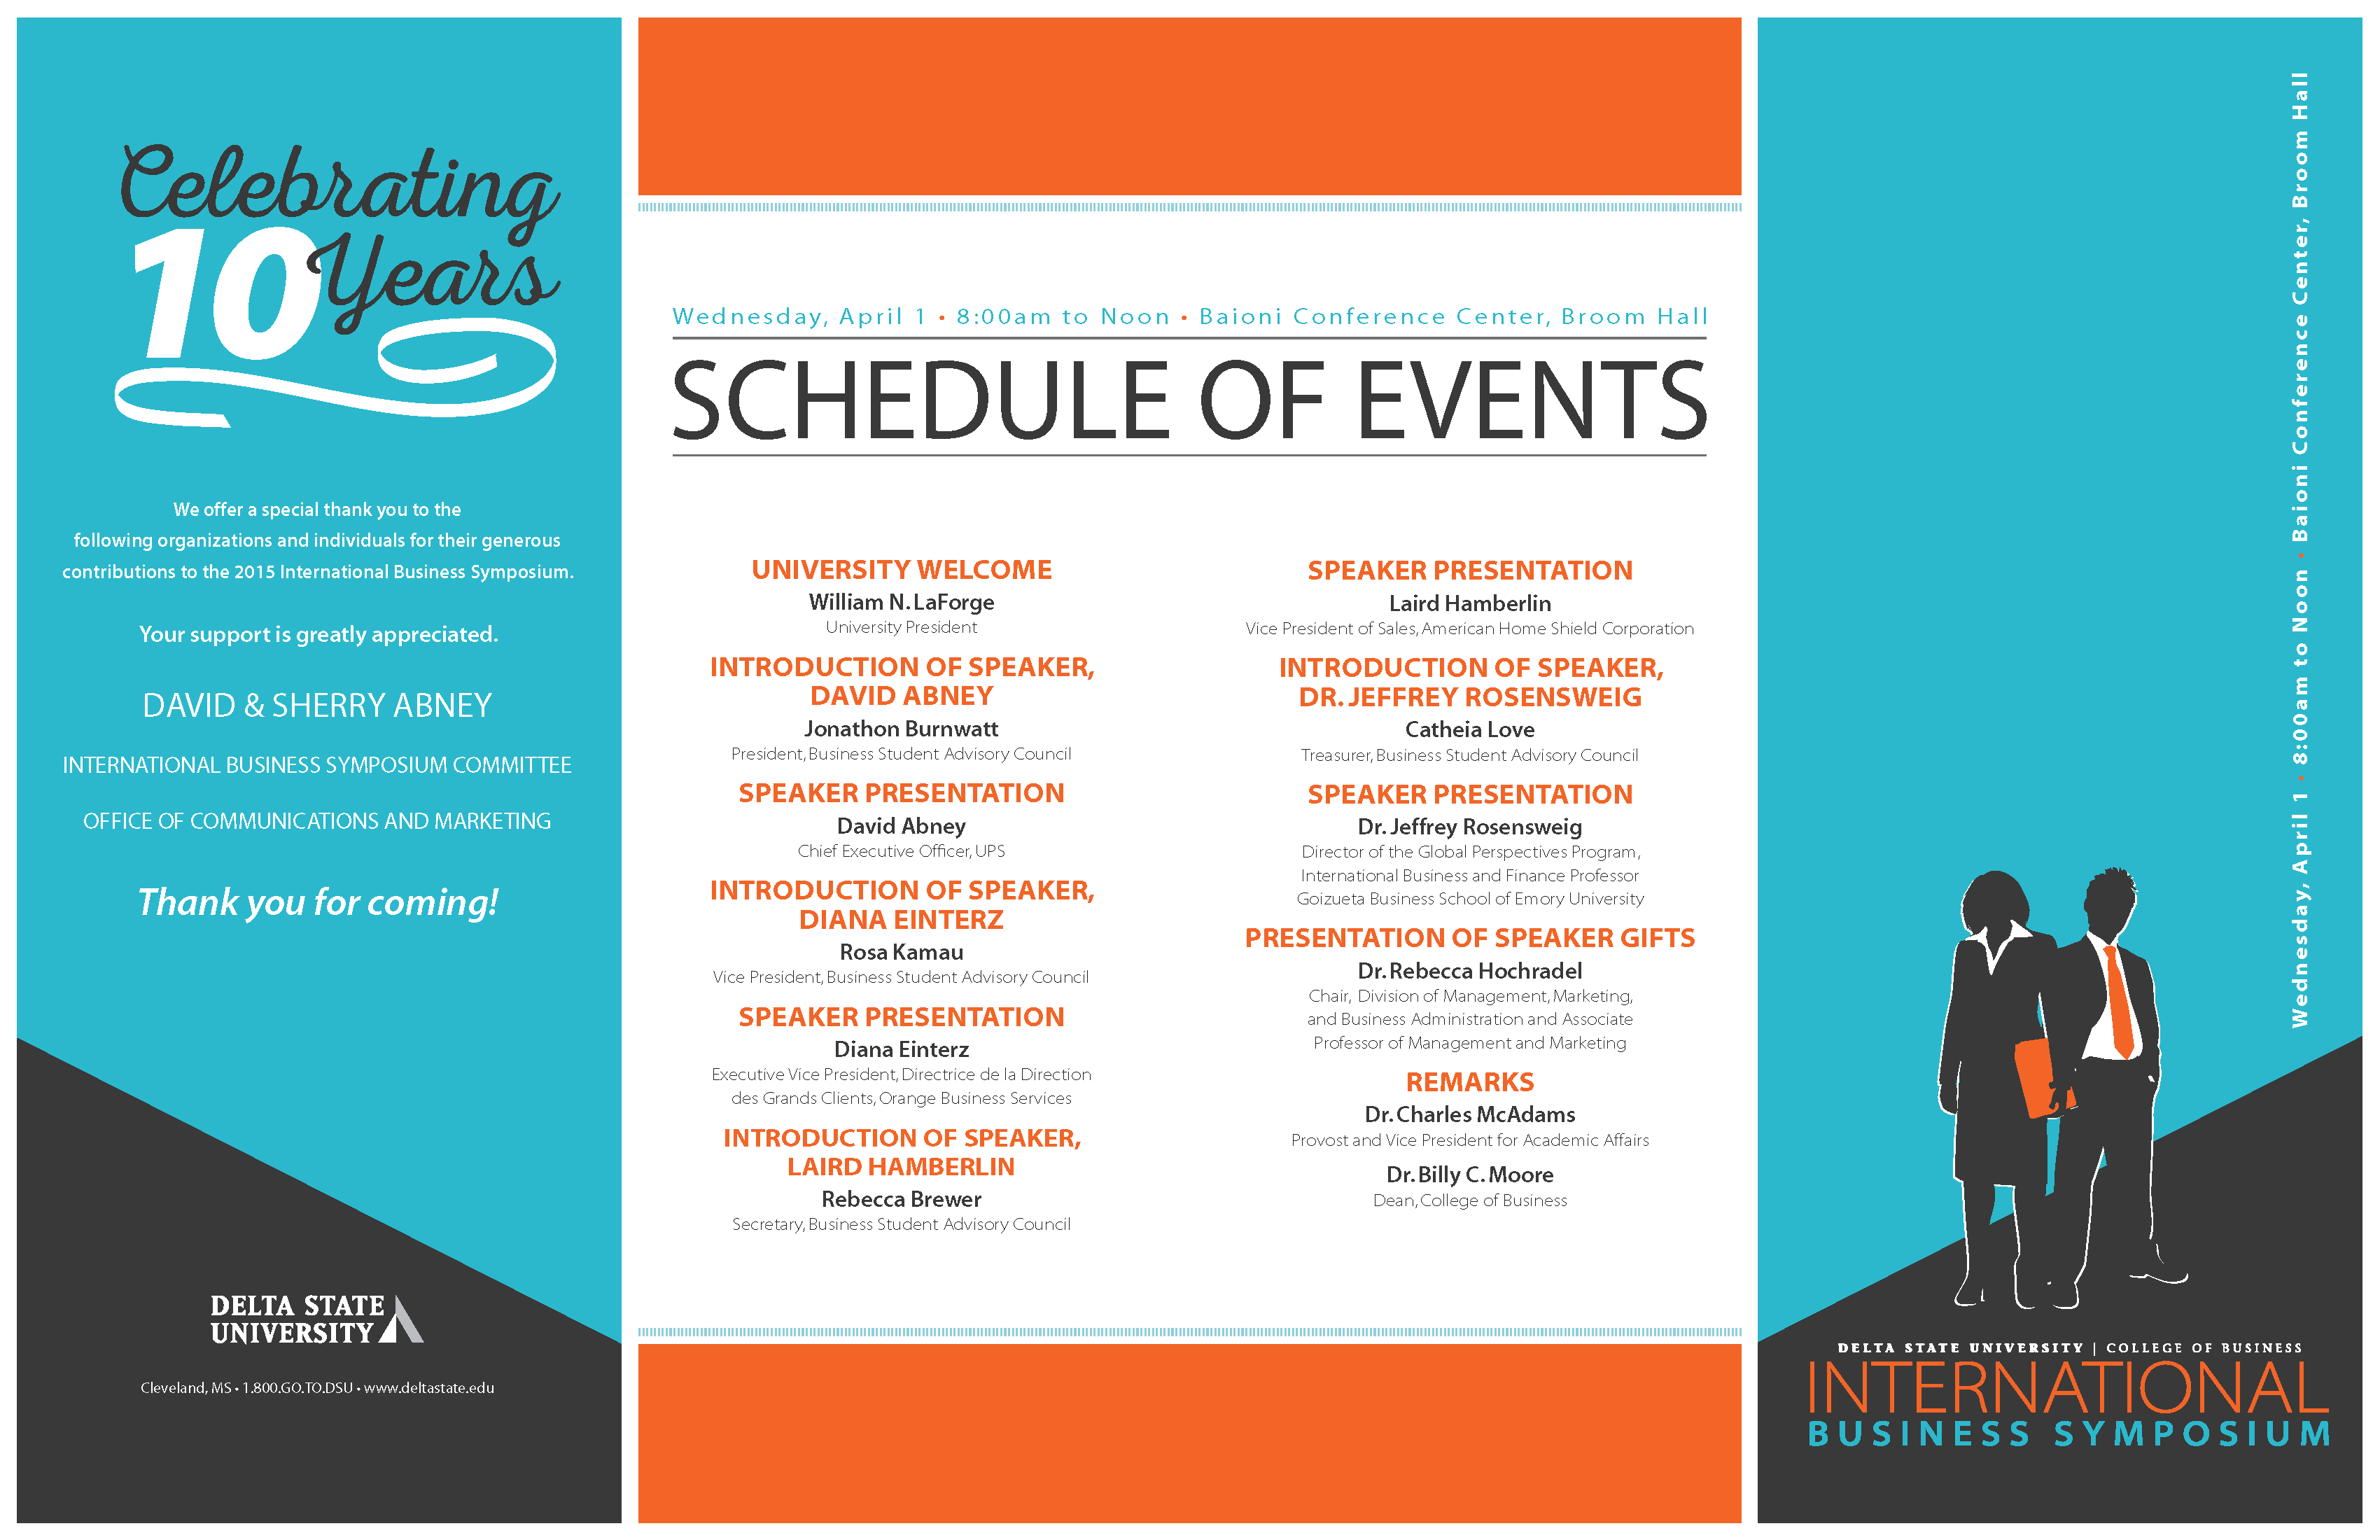 PROGRAMS AND EVENTS | TMC